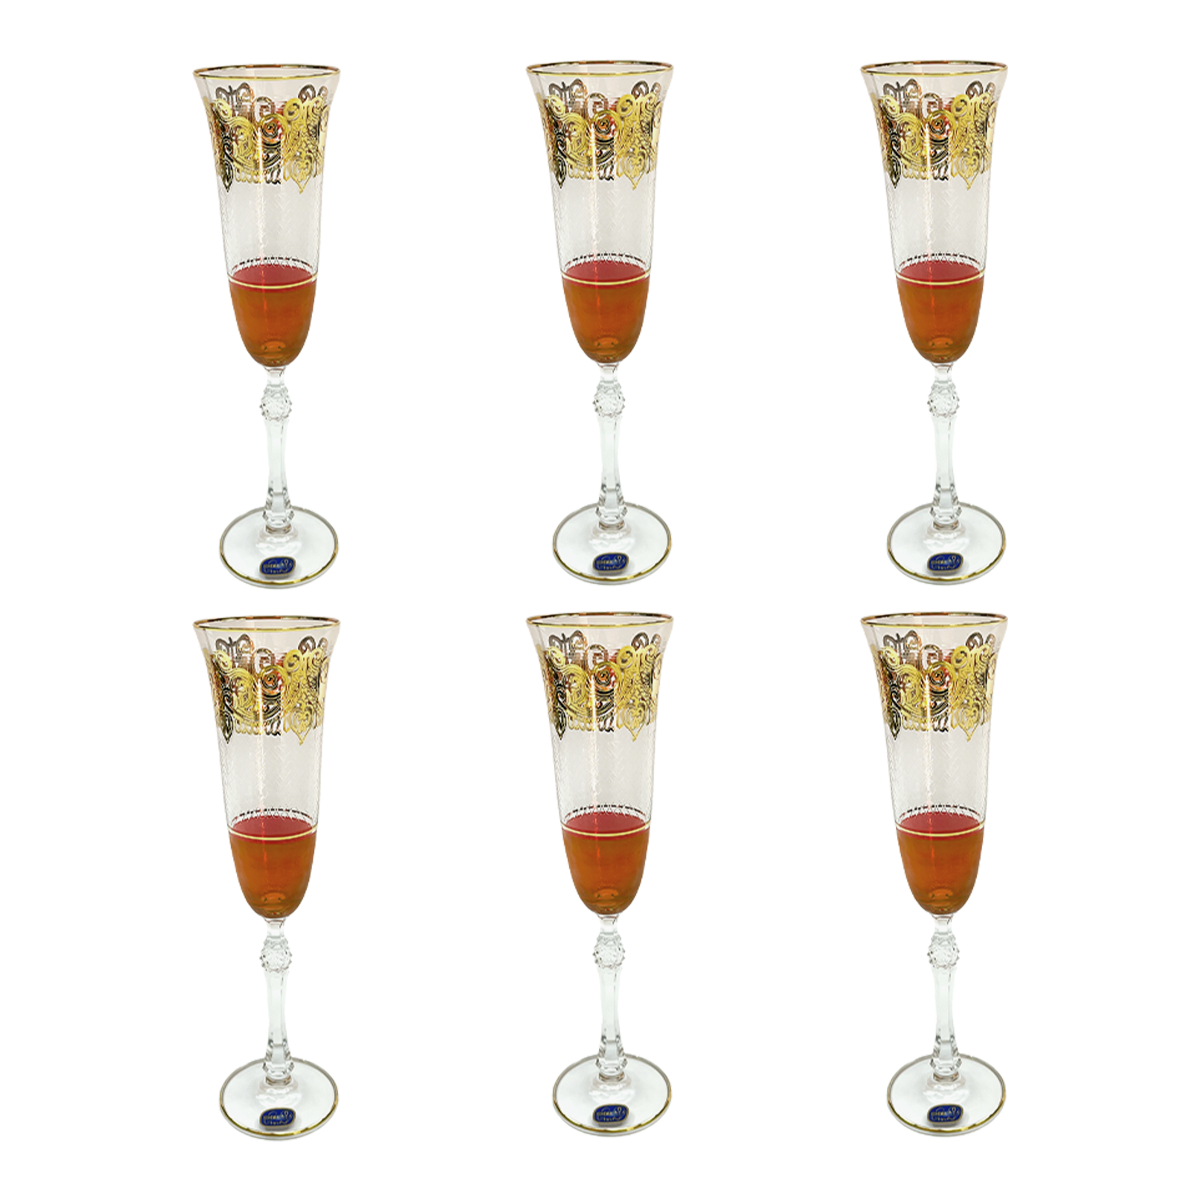 Bohemia Crystal Flute Set, 6 Pieces -Red & Gold -150 ml